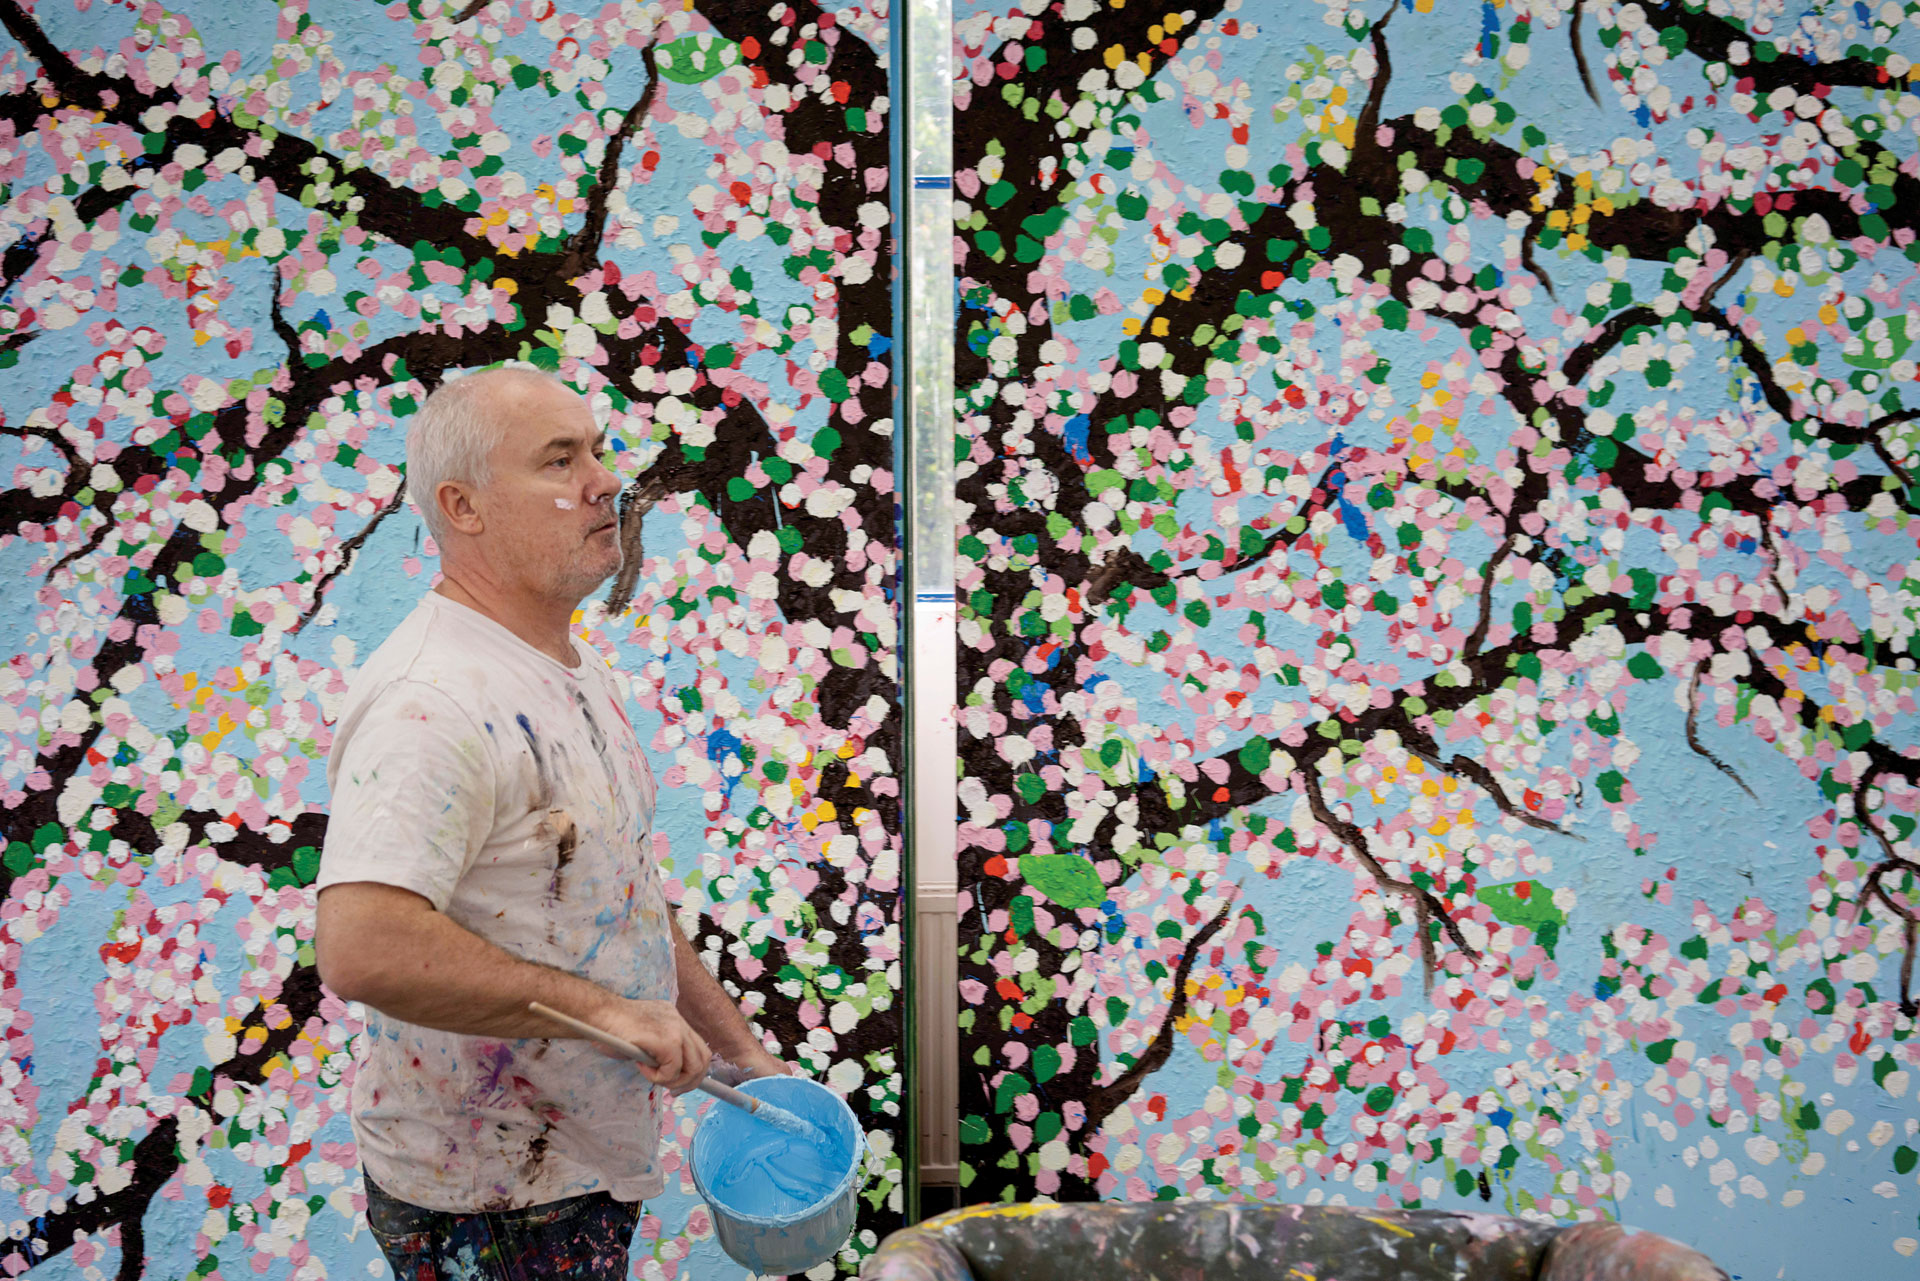 Damien Hirst’s first Paris show, Blossom Trees, shows his new work inspired by Monet, Van Gogh and Seurat 